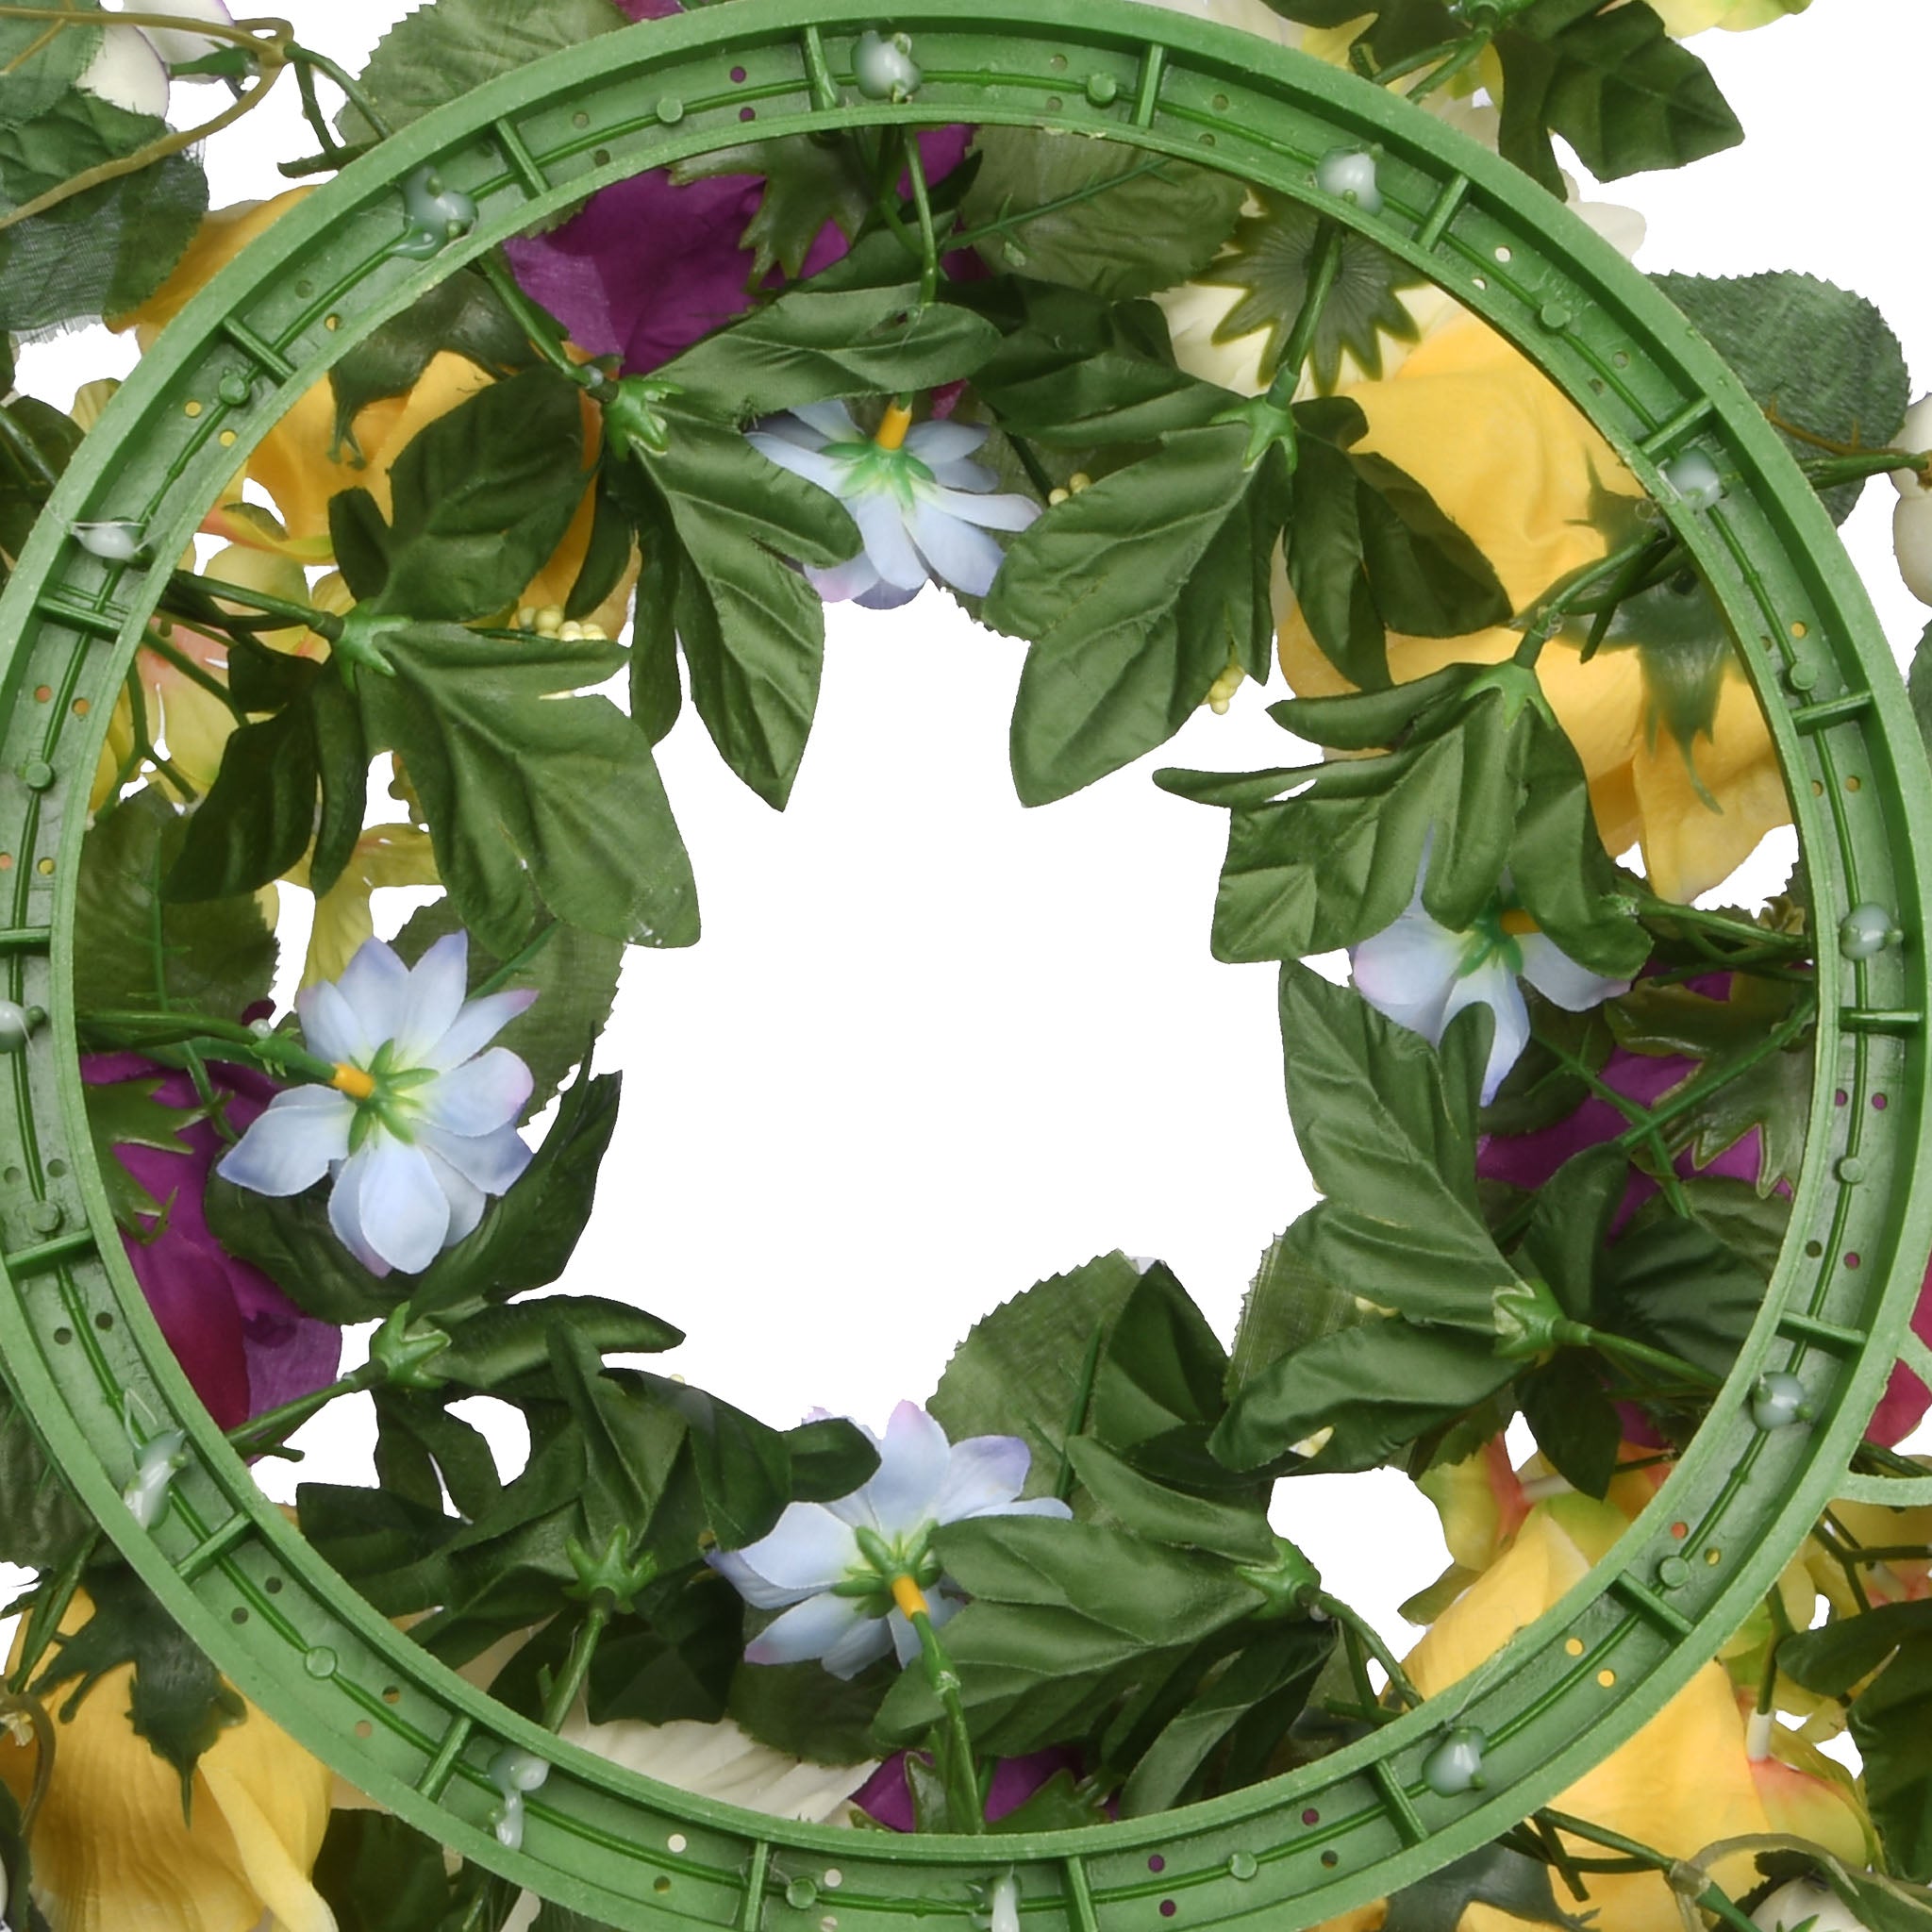 National Tree Company Artificial Hanging Wreath, Vine Stem Base, Decorated with Colorful Daisies, Hydrangeas, Roses, Leafy Greens, Spring Collection, 18 Inches